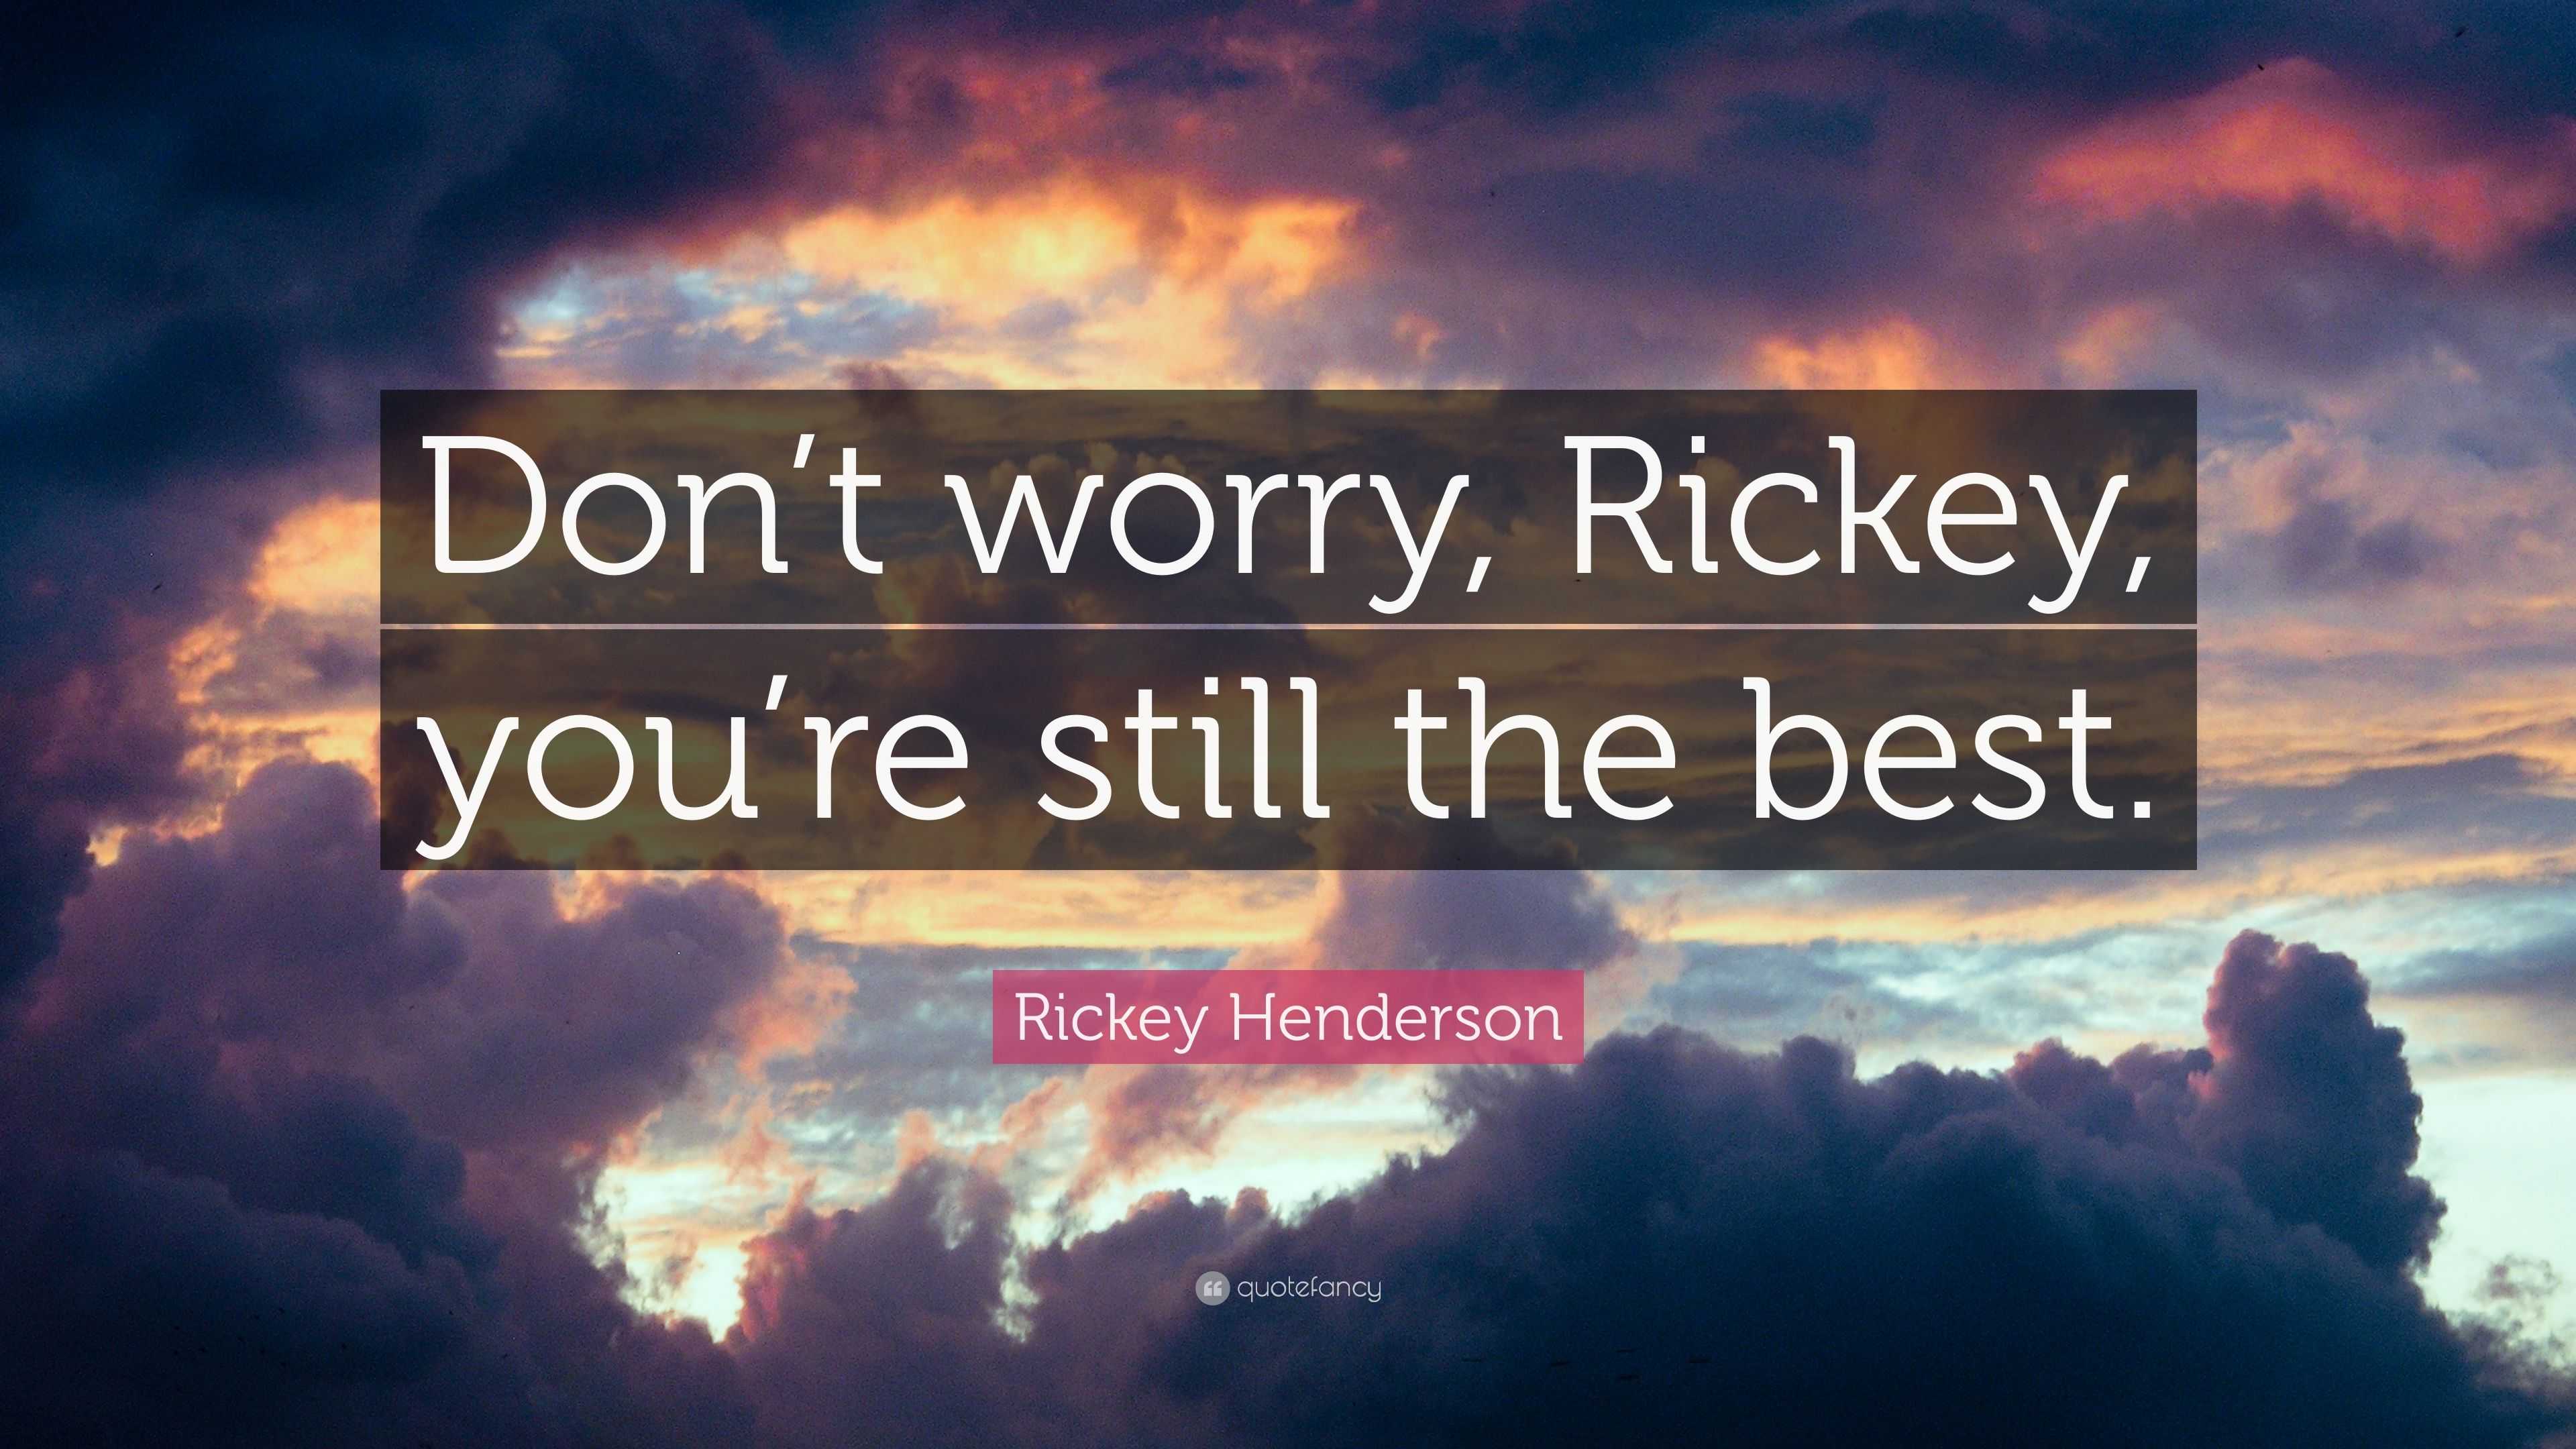 Rickey Henderson Quote: “Don't worry, Rickey, you're still the best.”